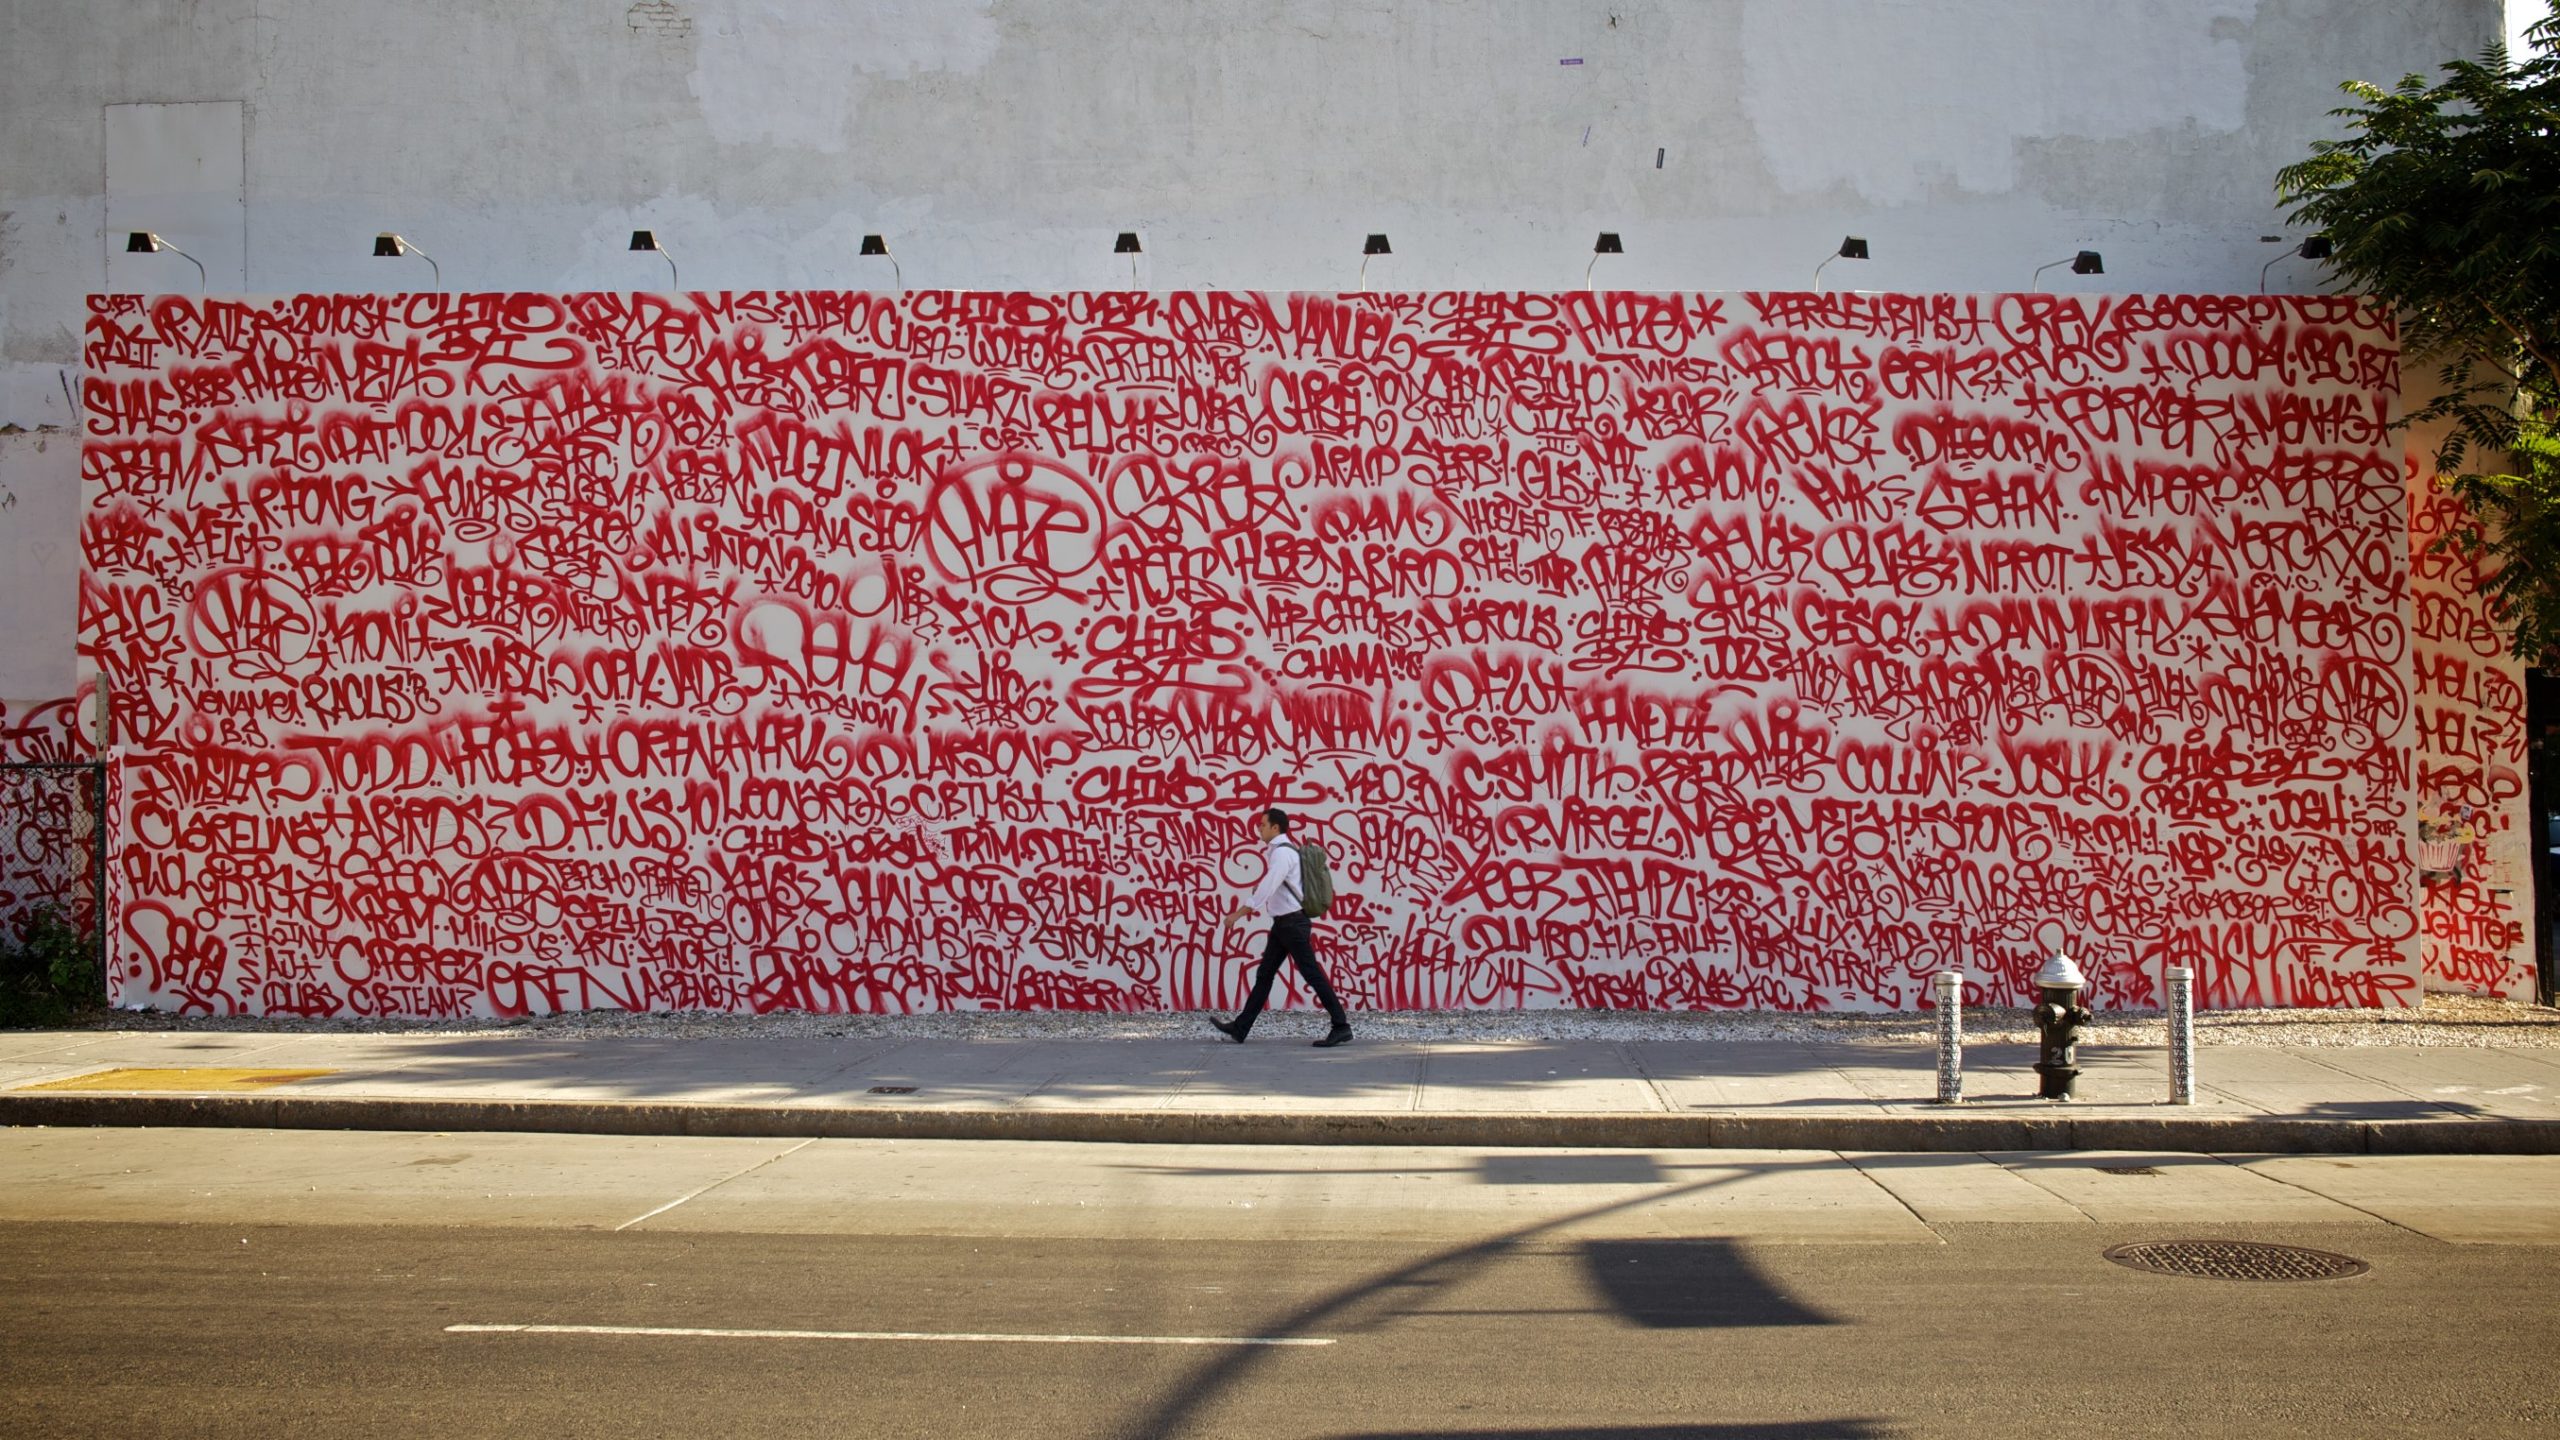 Barry McGee's tag murals – Walls covered with hundreds of red tags